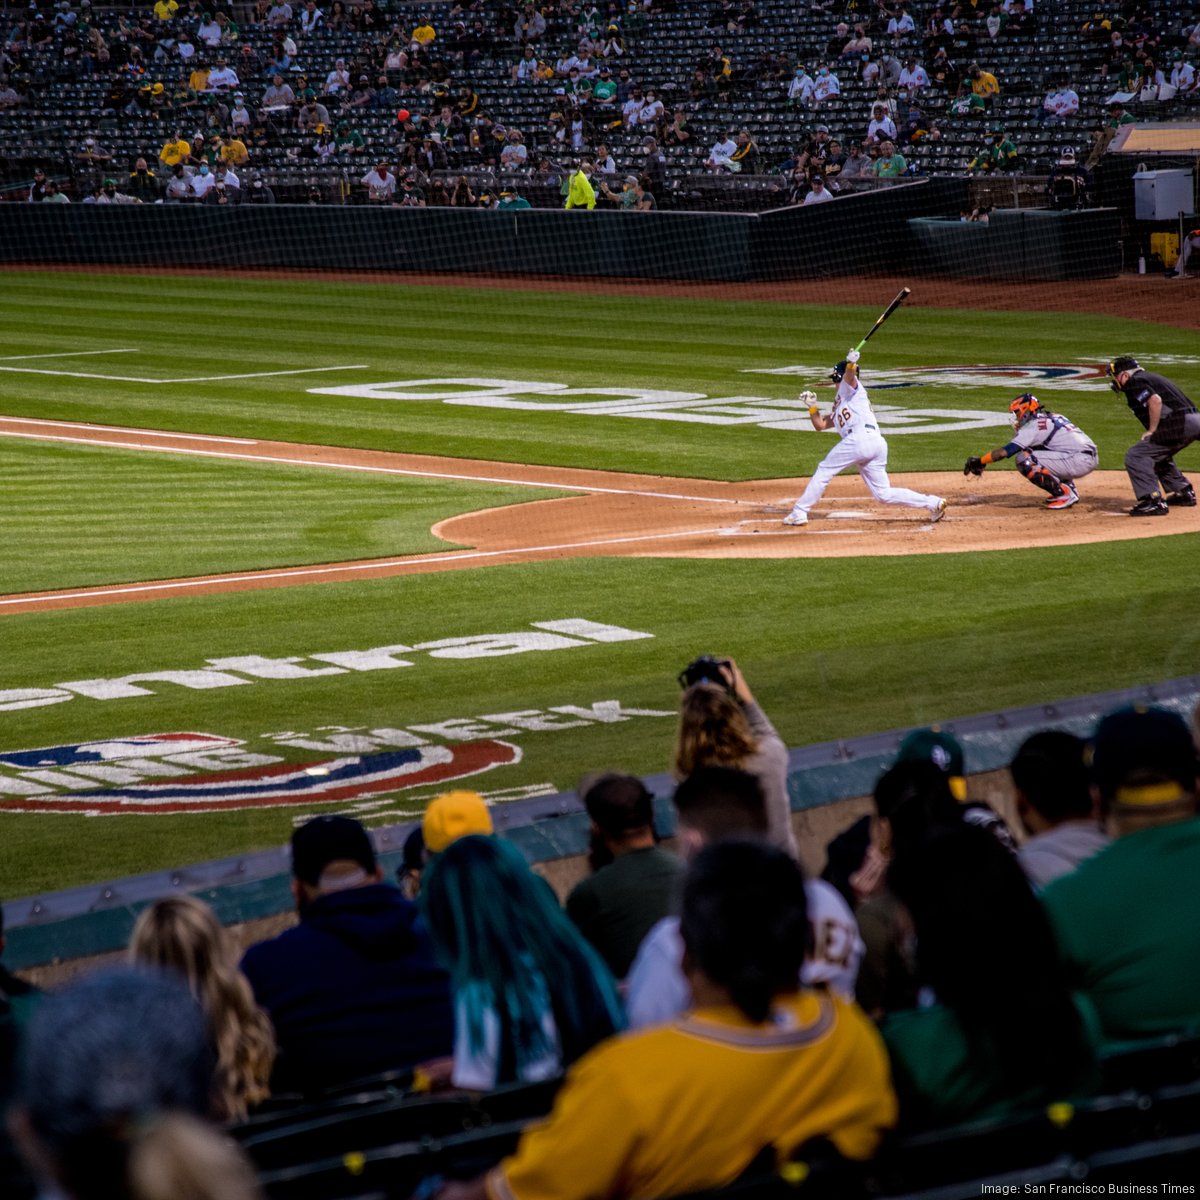 Tentative deal reached for bill to create A's baseball stadium in Las Vegas